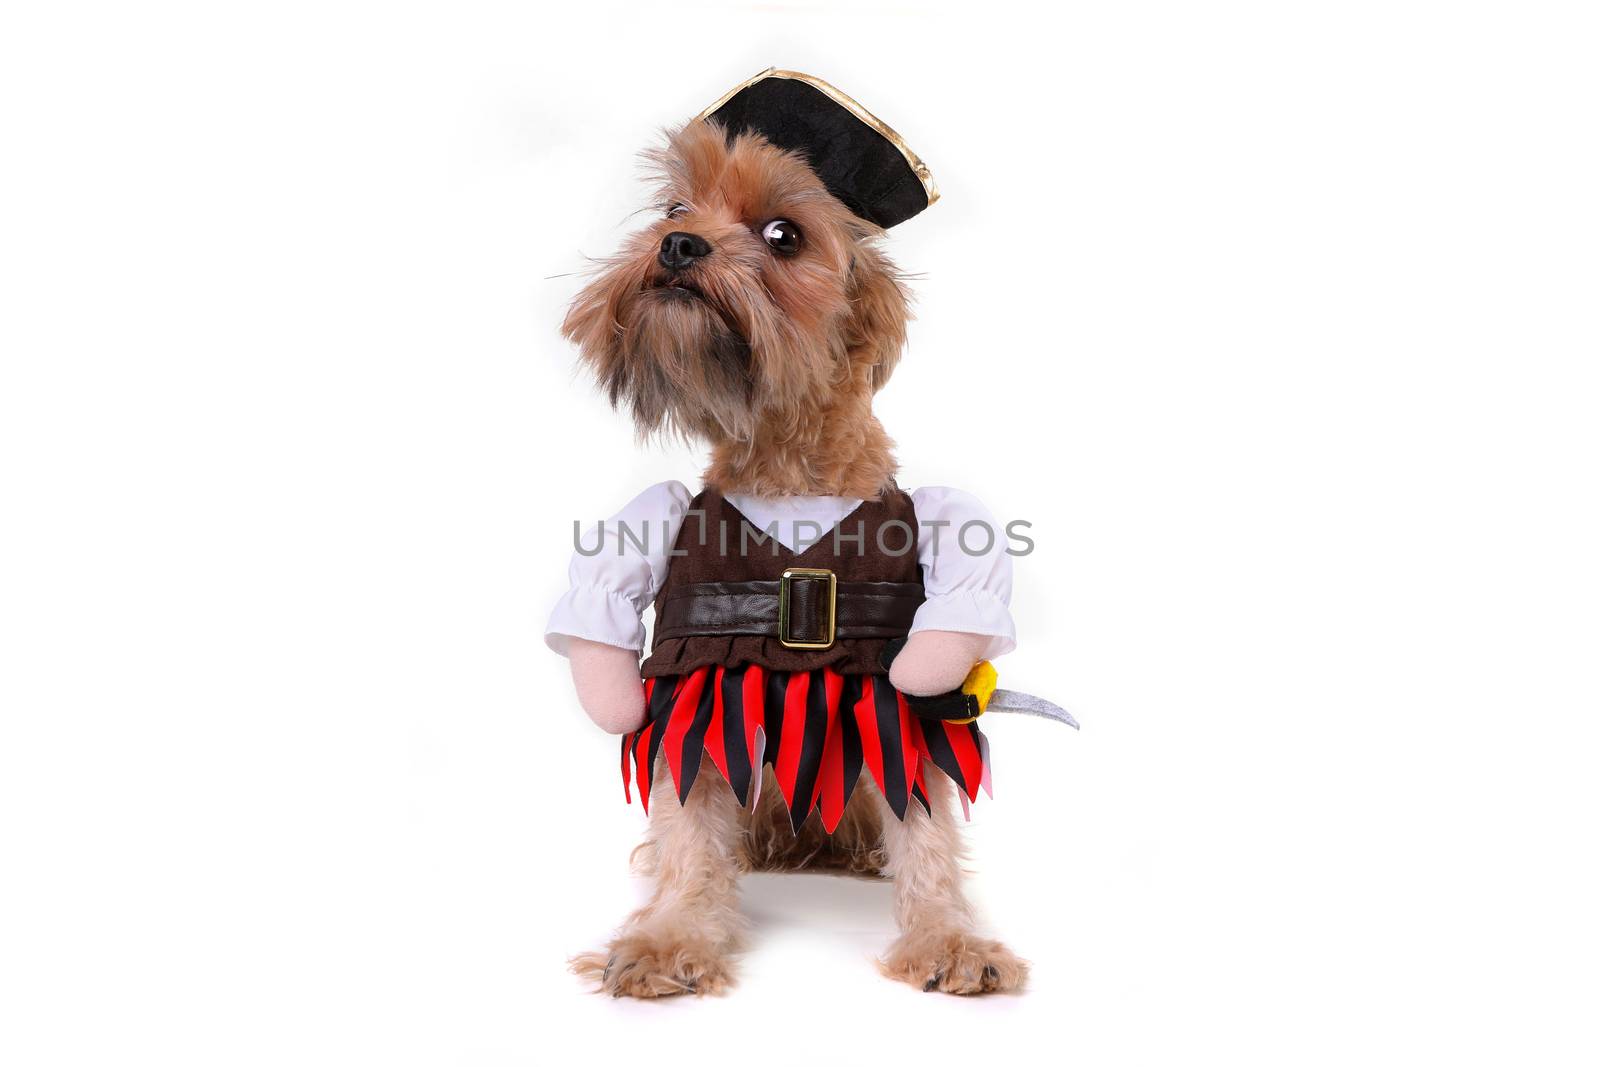 Funny Mutt Dog in Pirate Inspired Clothing Costume by tobkatrina